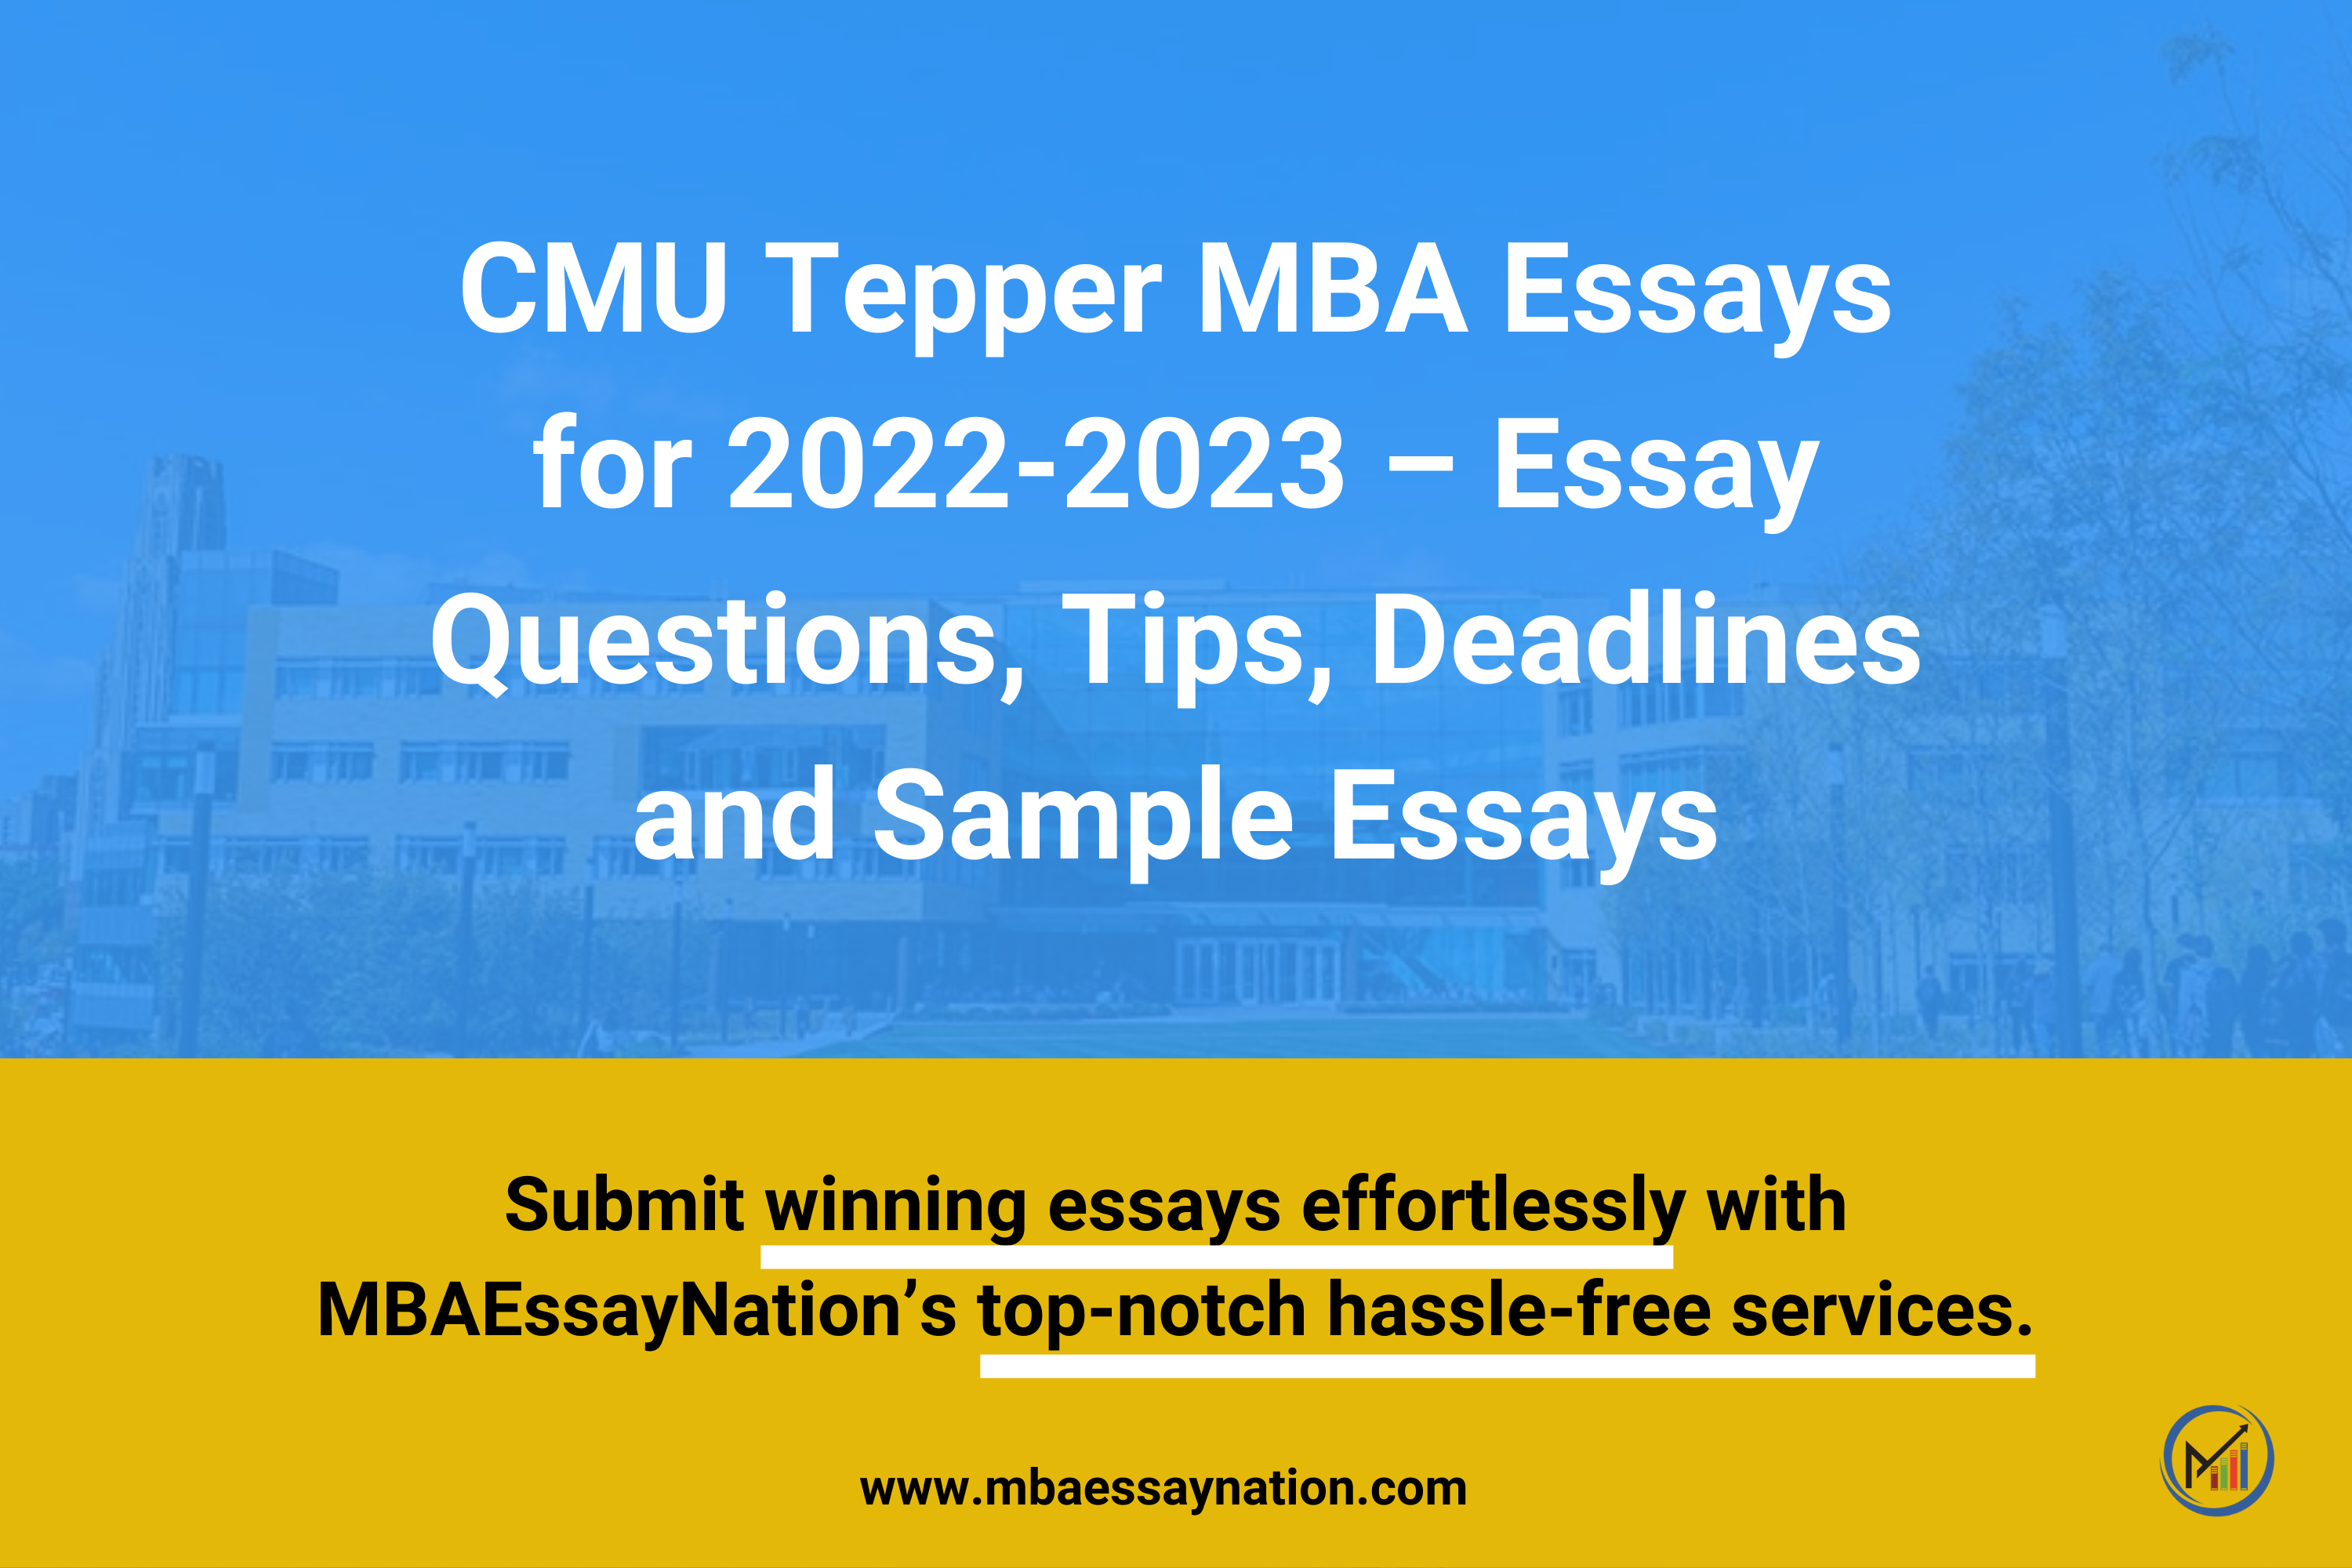 CMU Tepper MBA Essays for 2022-2023 – Essay Questions, Tips, and Deadlines [With Sample Essays Inside]